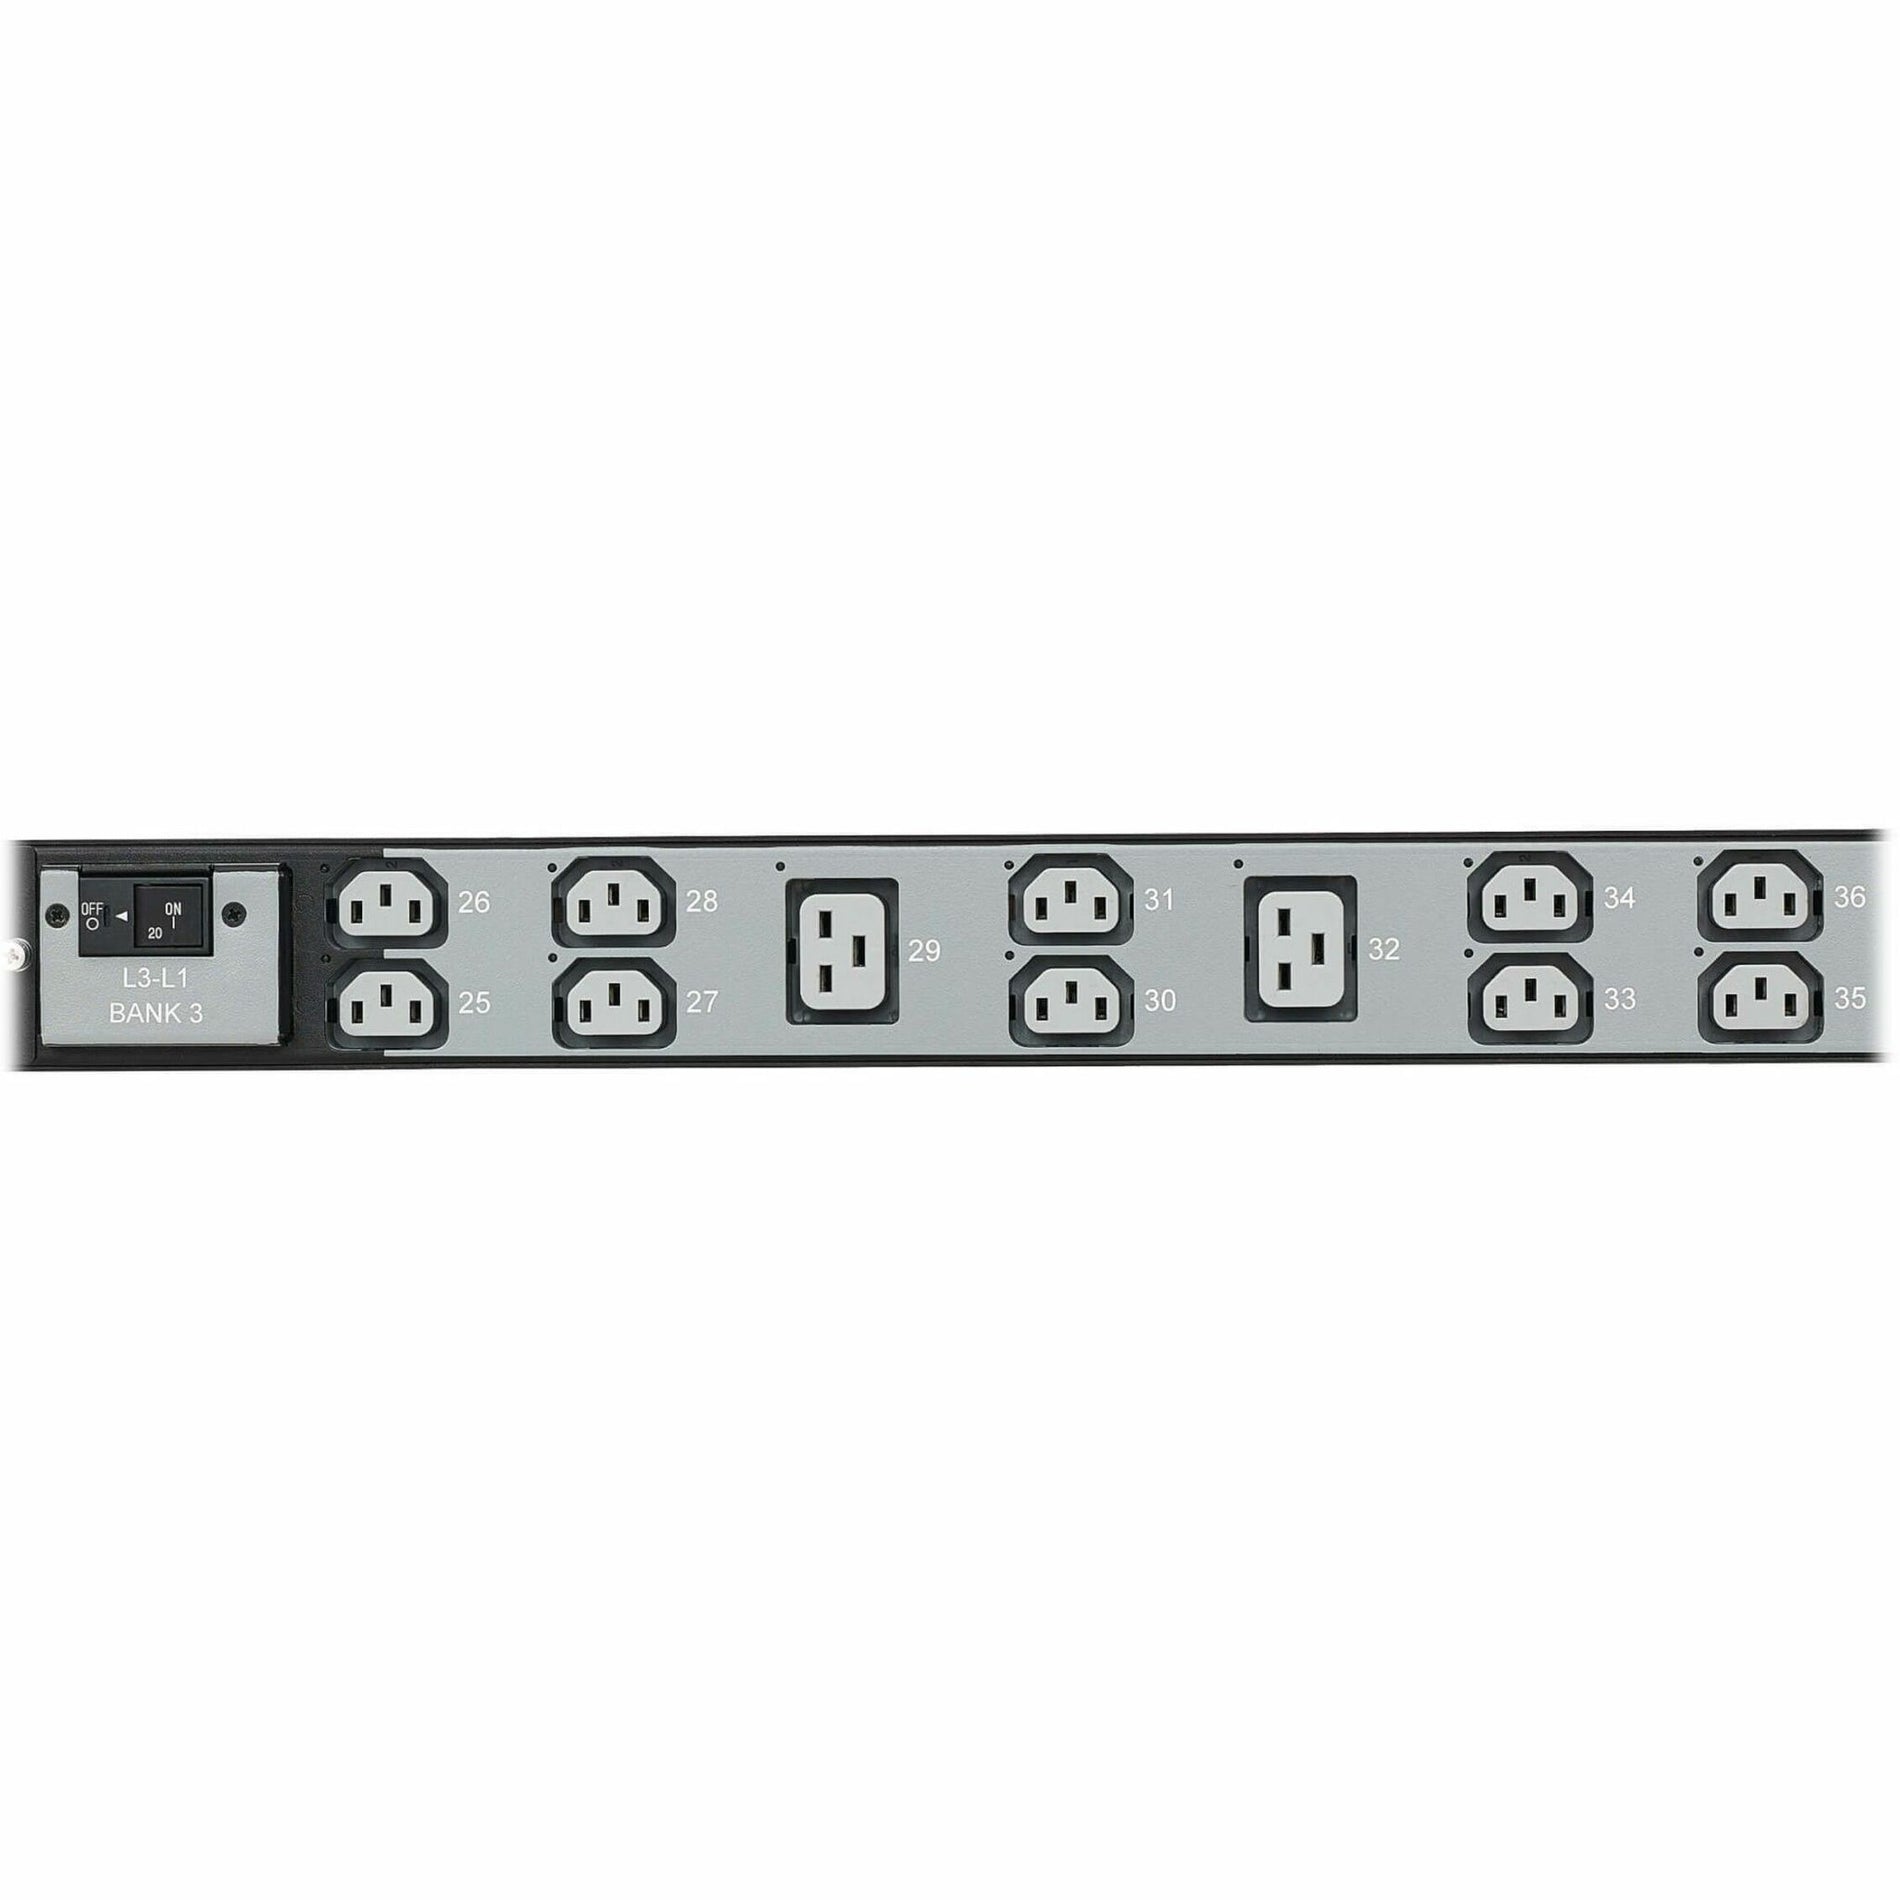 Tripp Lite PDU3EVSR1H50 36-Outlets PDU, 12.60 kW Power Rating, Managed, Switched, Overload Protection